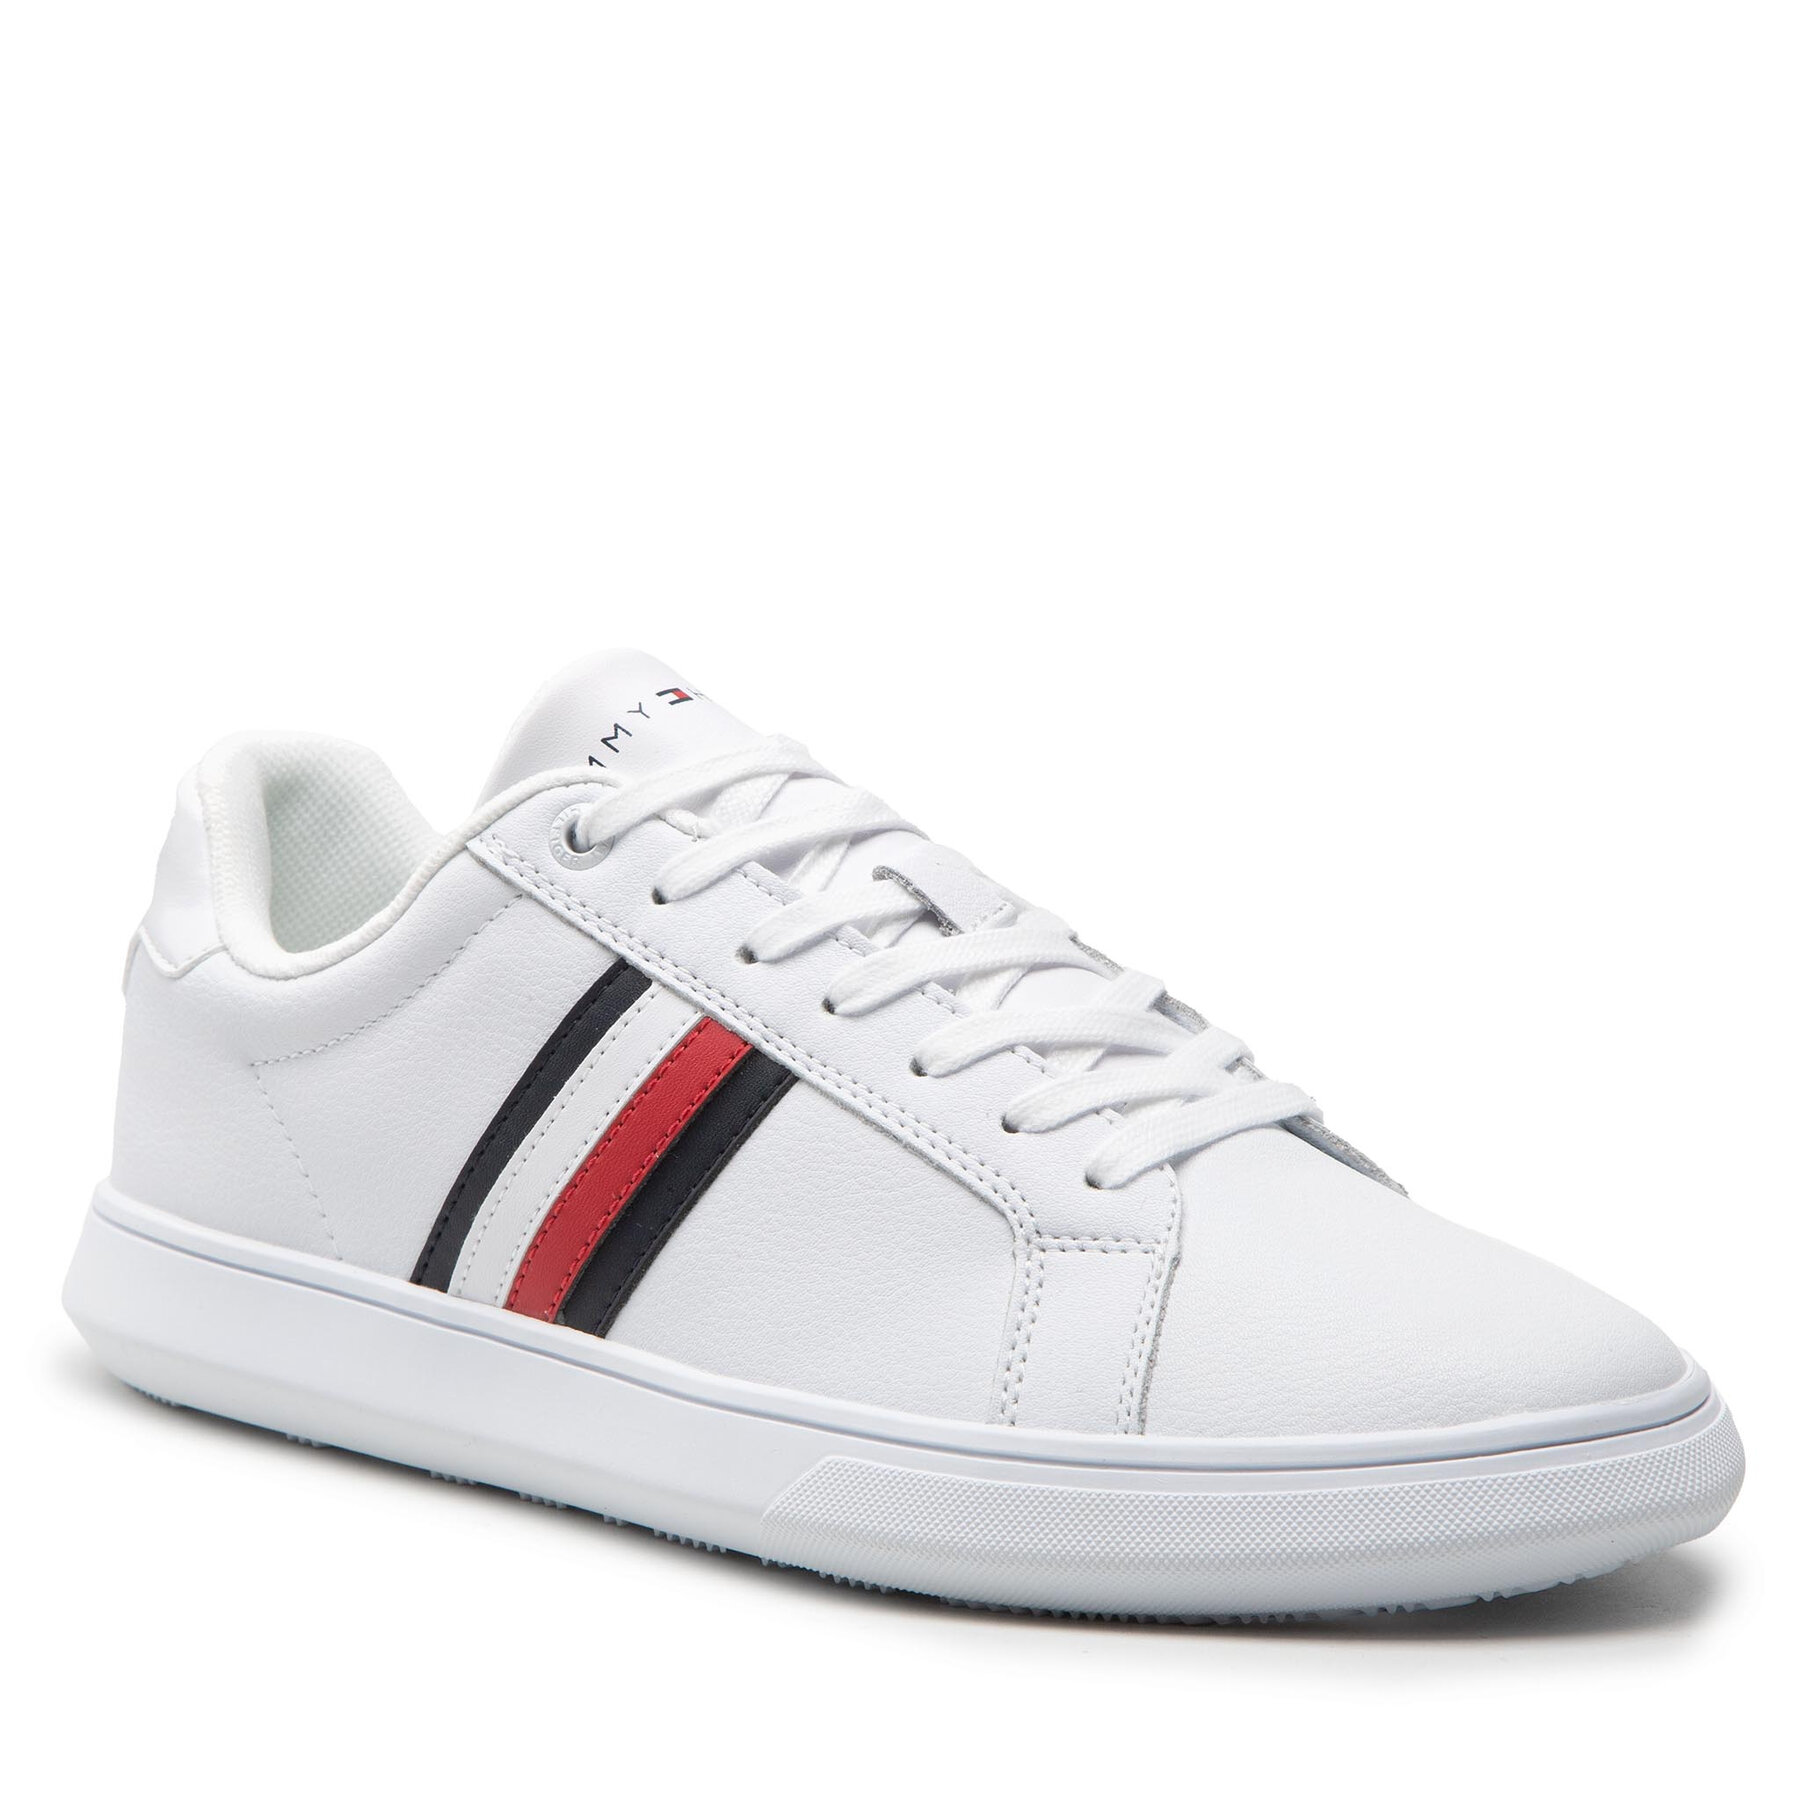 Sneakers Tommy Hilfiger Corporate Cup Leather Stripes FM0FM04275 White YBR Corporate imagine noua